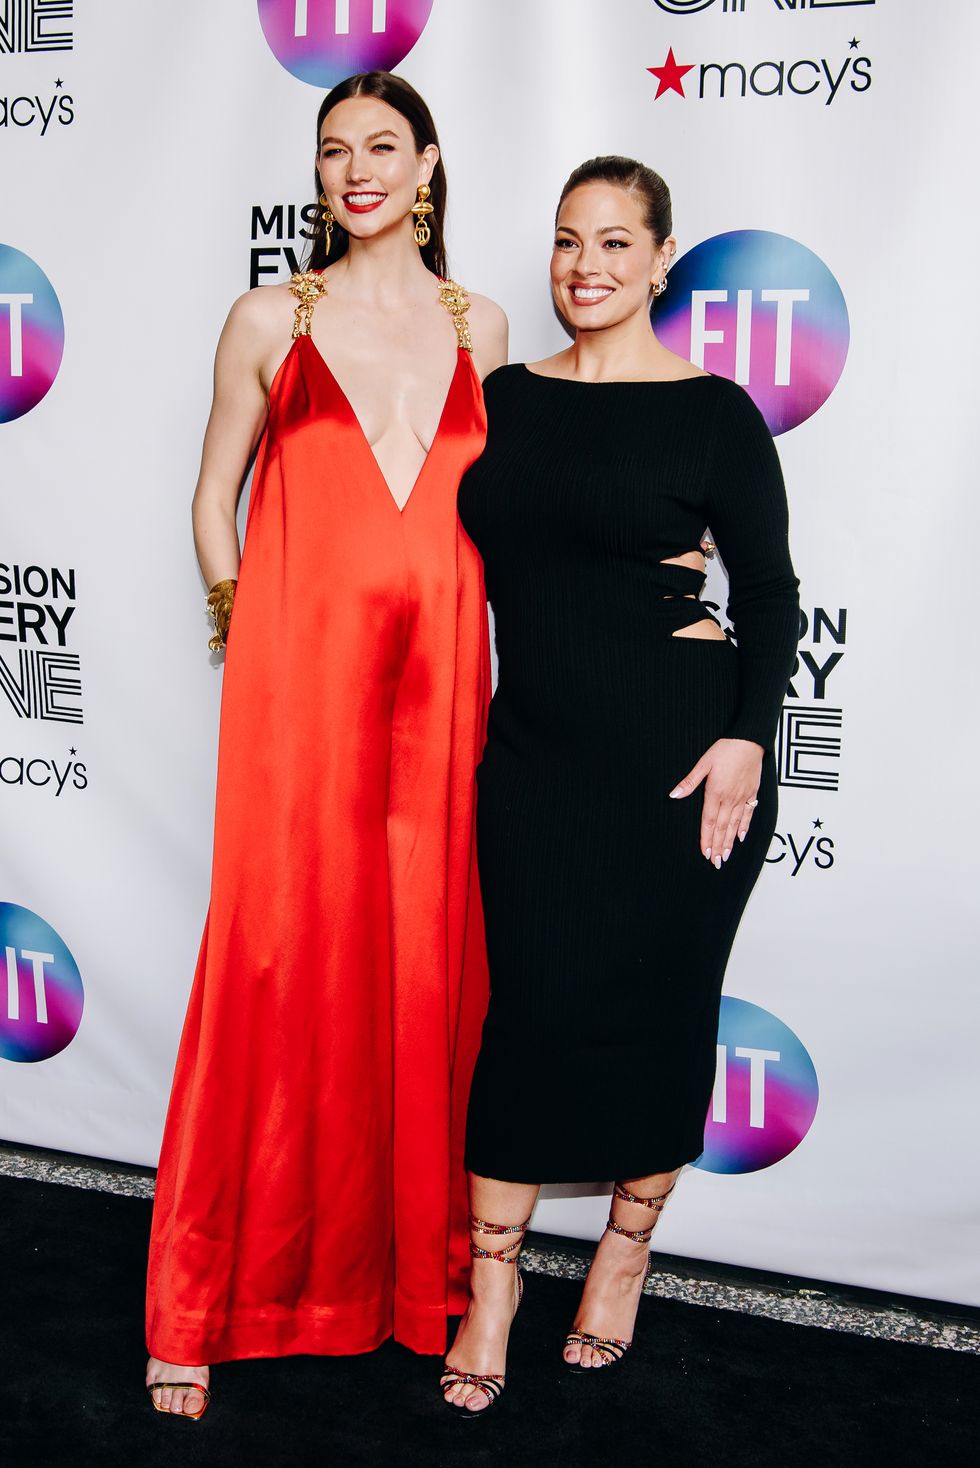 Karlie Kloss and Ashley Graham at Upcoming Fashion 2023 held at the Fashion Institute of Technology on May 10, 2023 in New York City Photo by Nina WesterveltVariety via Getty Images